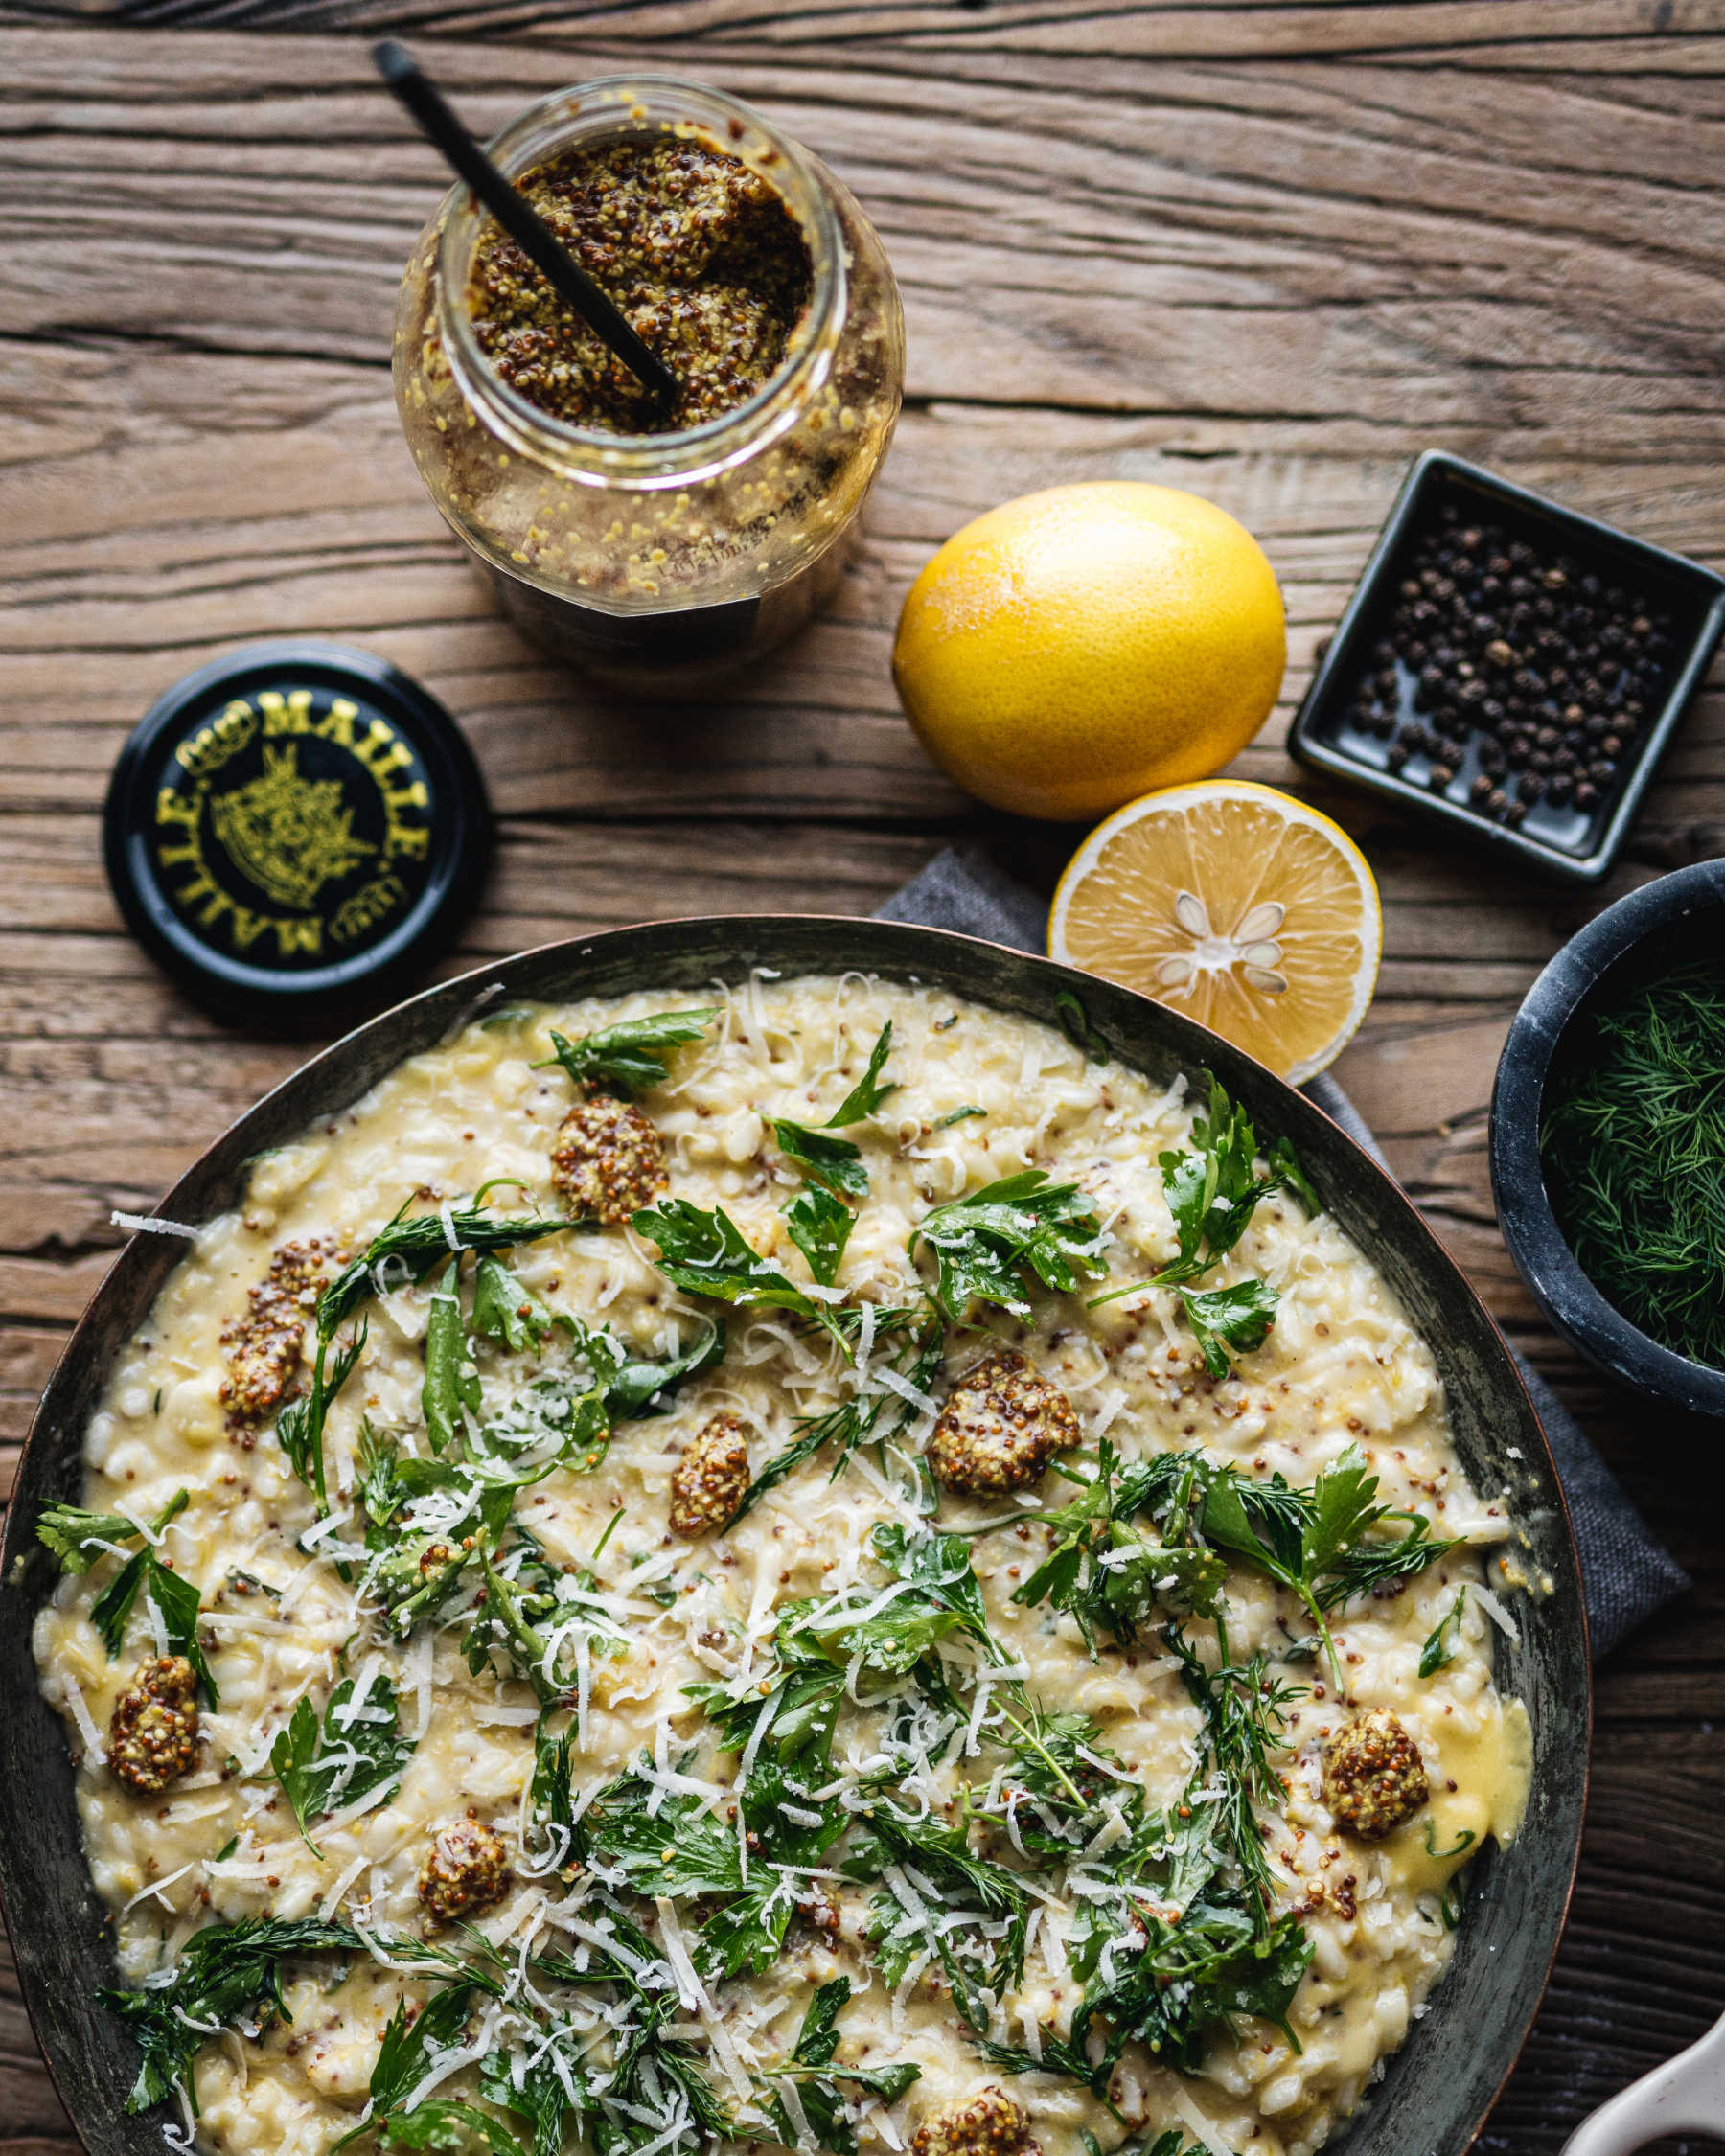 Roasted Squash risotto and herb salad image